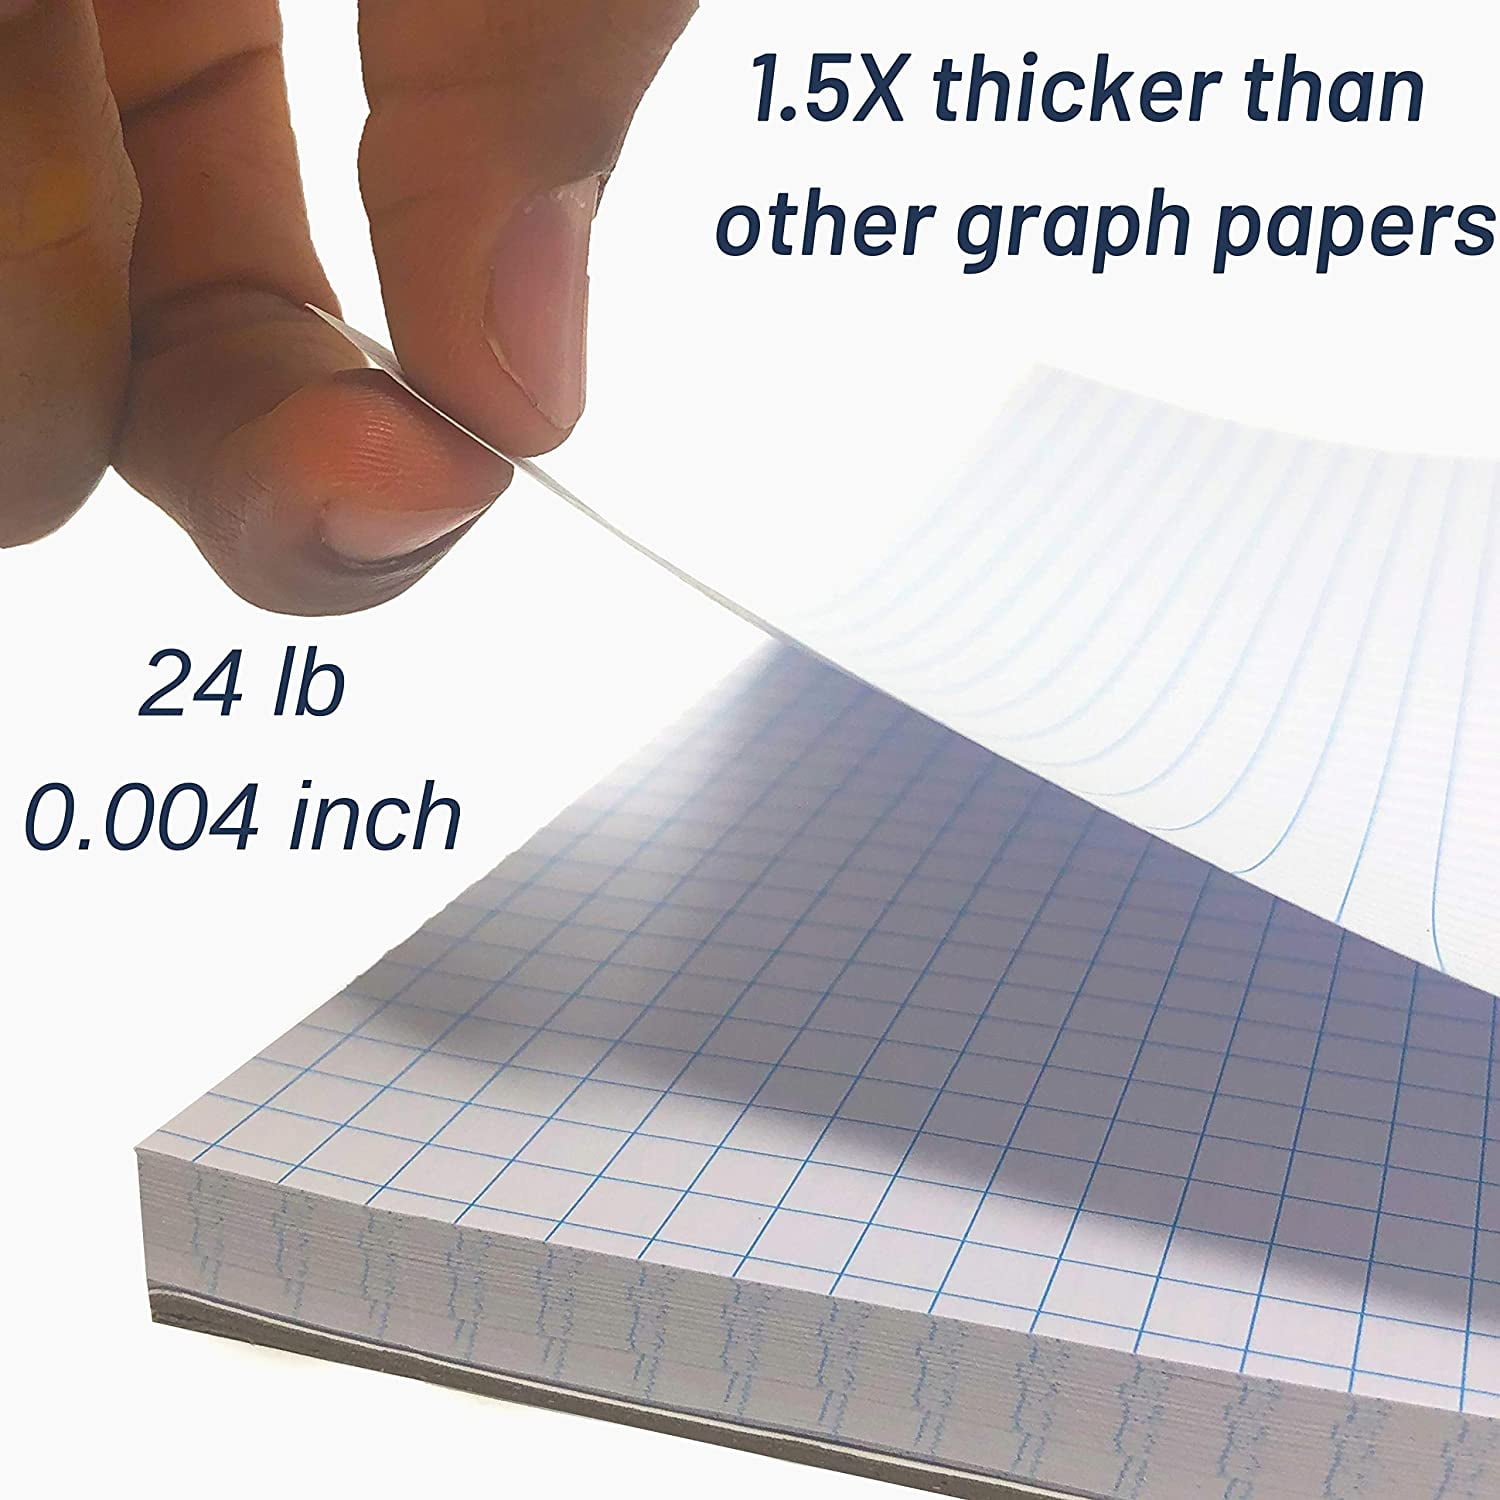 Mr. Pen- Graph Paper, 22 Sheets, 17 inchx11 inch, 4x4 (4 Squares per inch), Colored Lined, Graphing Paper, Grid Paper, Graph Paper Pad, 1/4 Graph